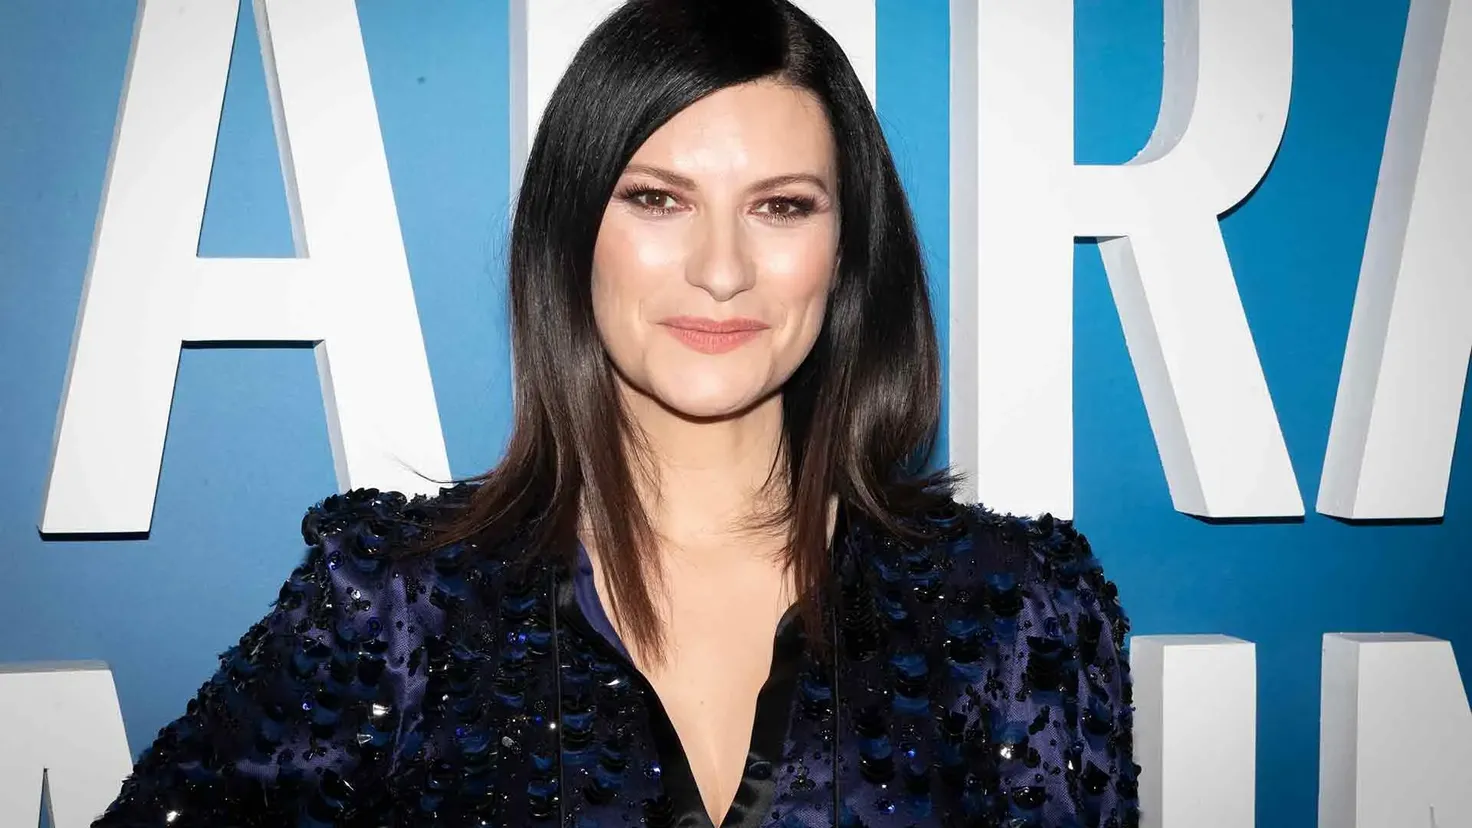 A man is arrested for shooting 17 times at the doors of a Laura Pausini concert
